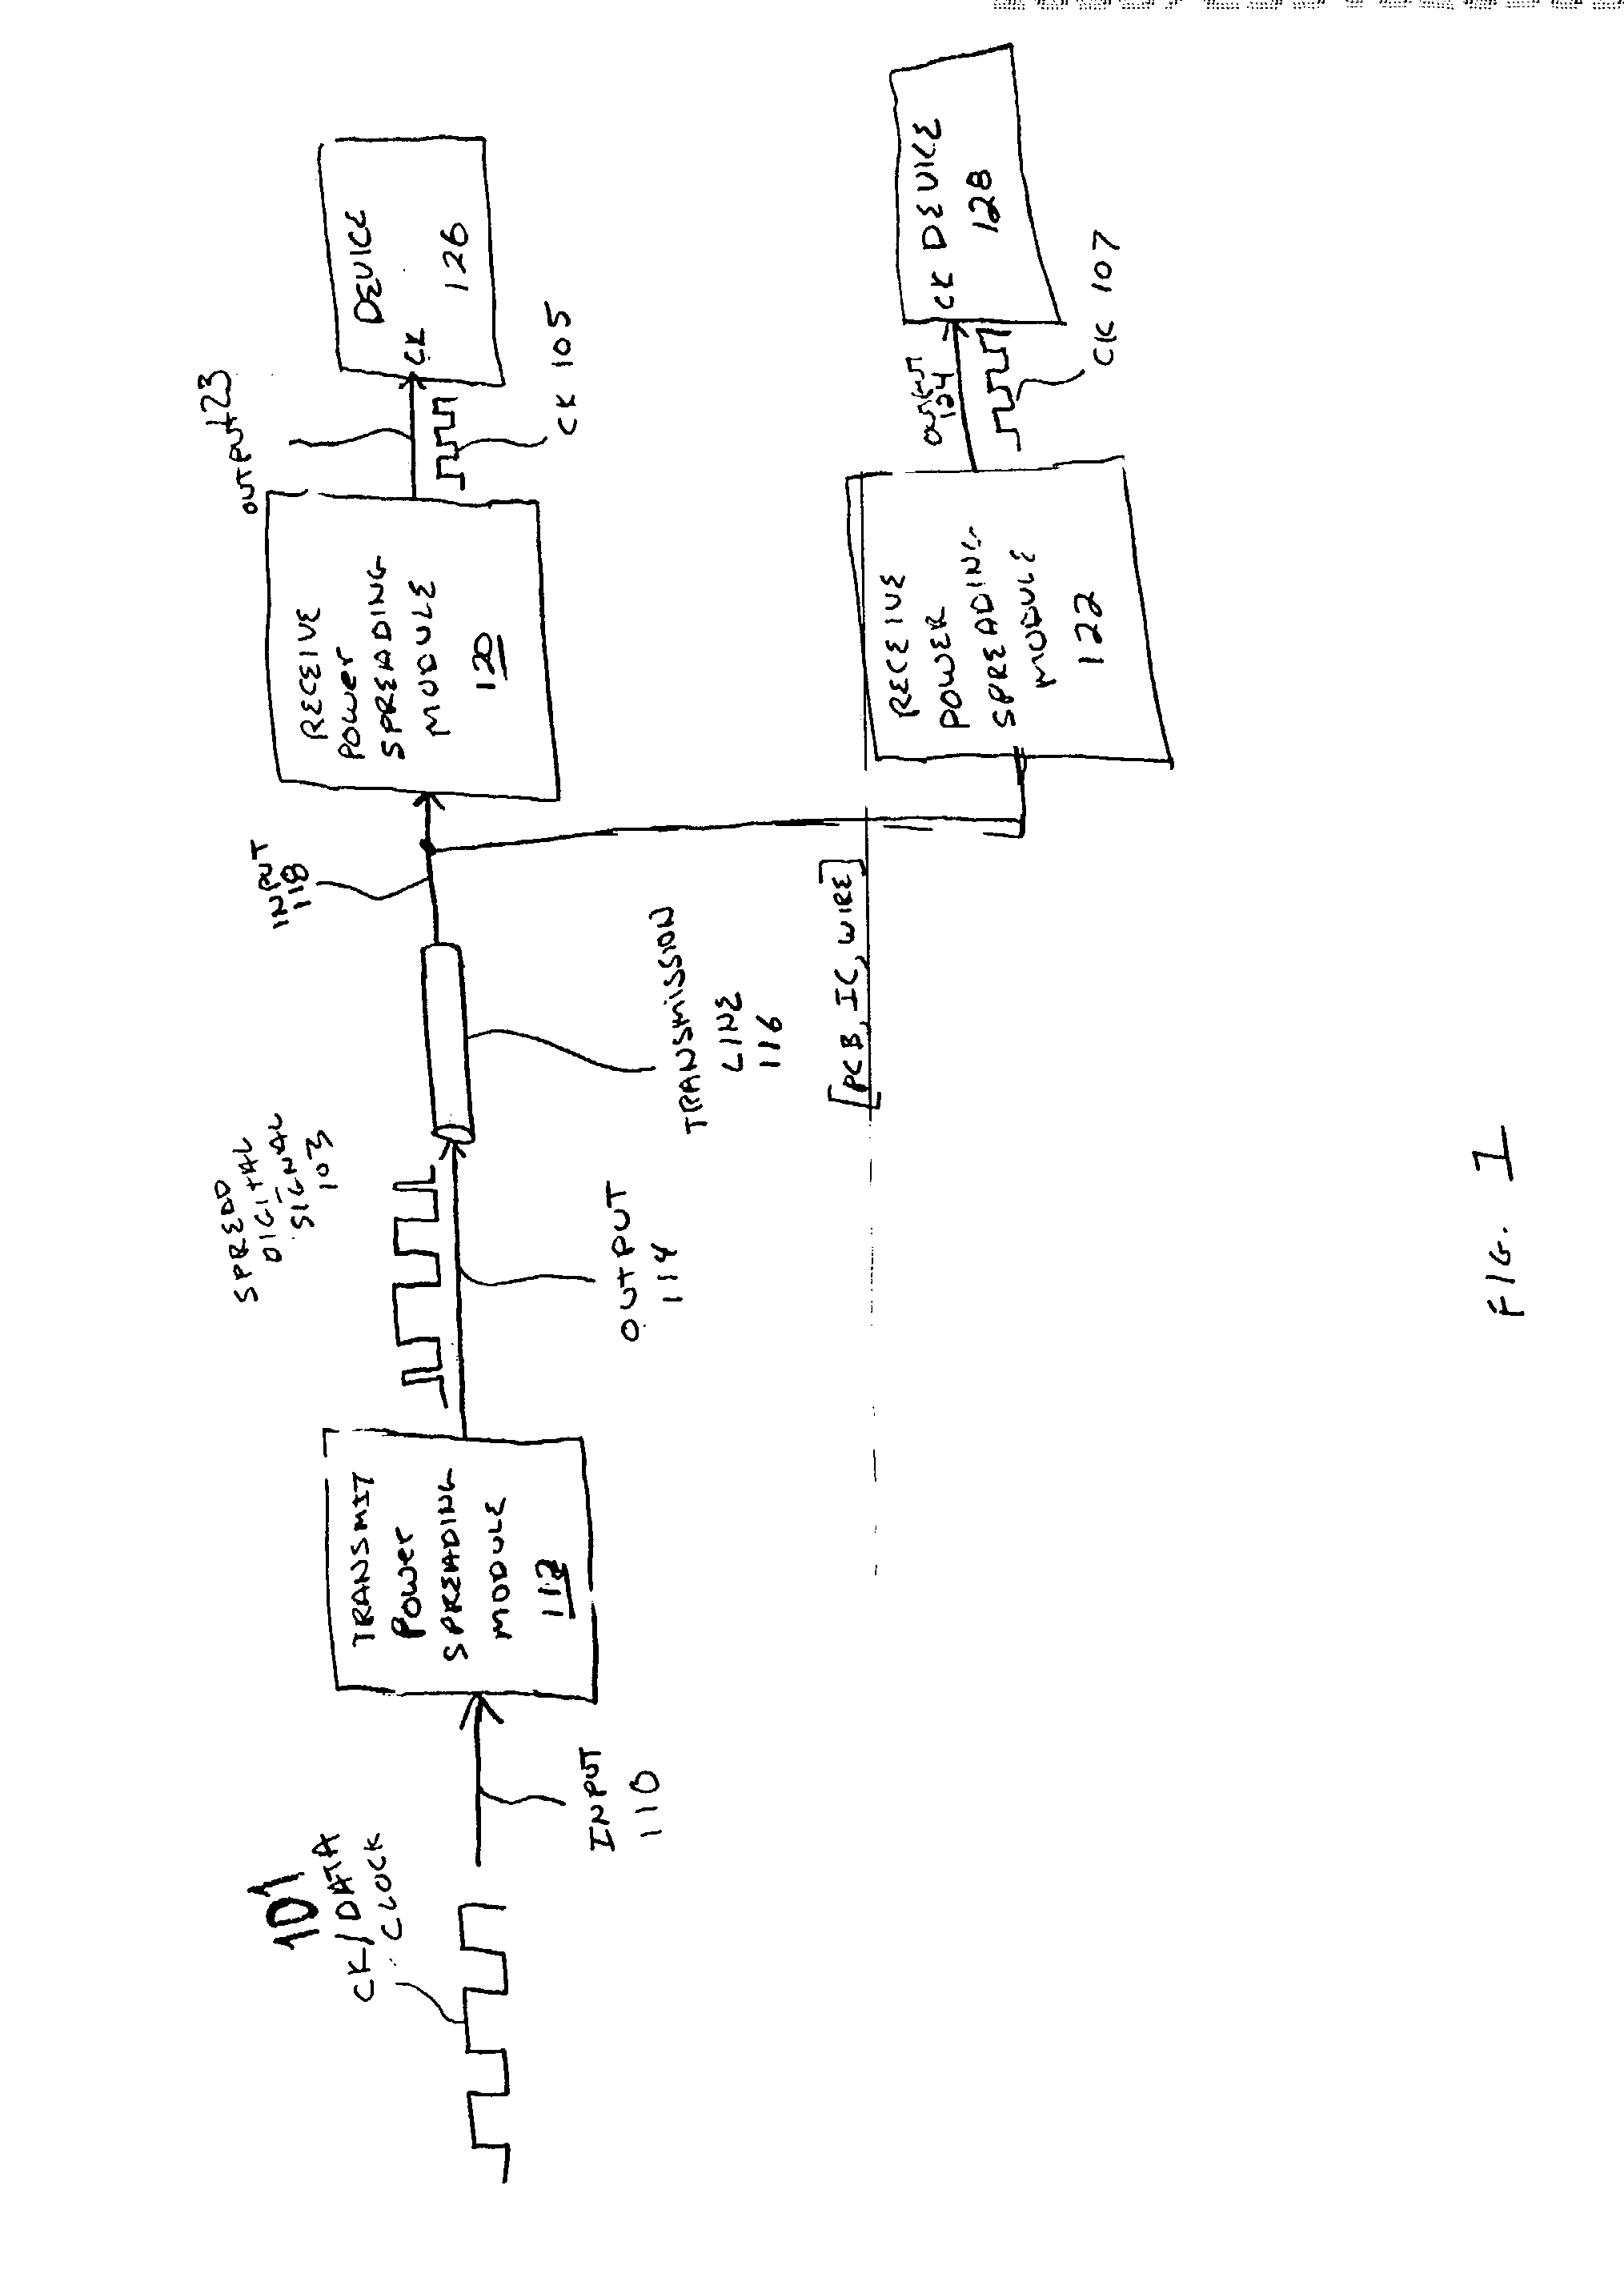 Method and system of reducing electromagnetic interference emissions